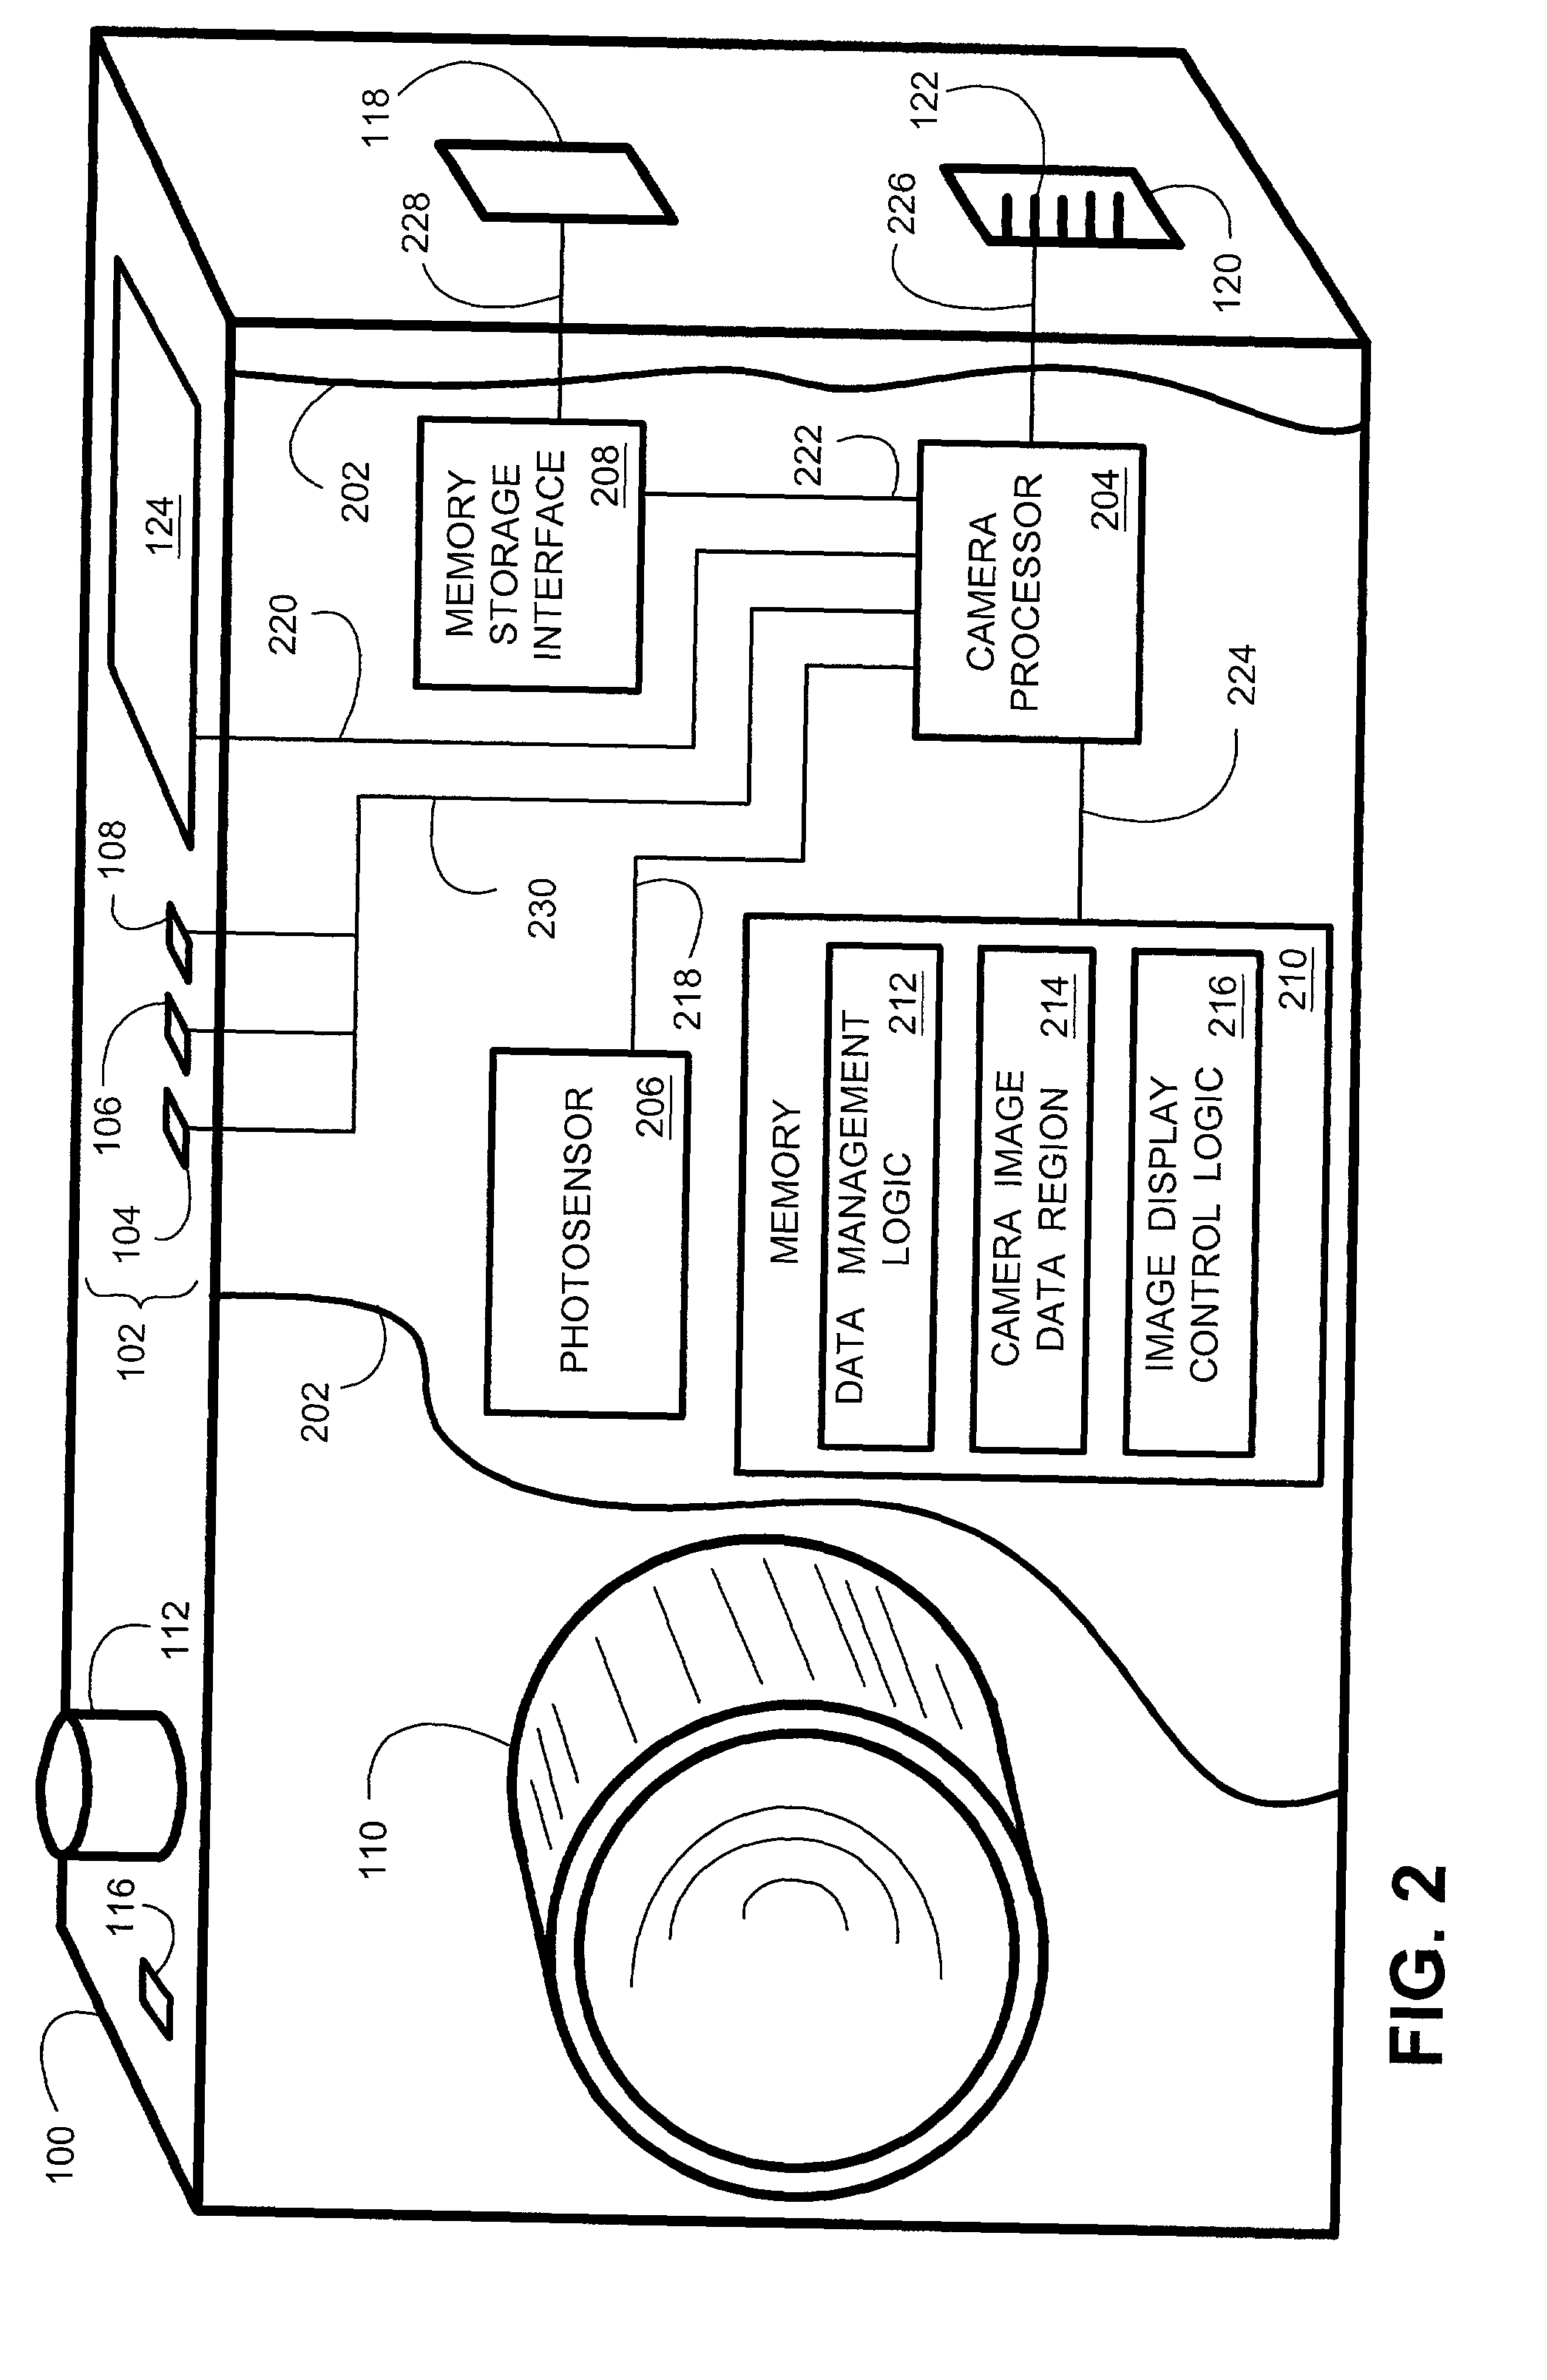 System and method for a simplified digital camera interface for viewing images and controlling camera operation